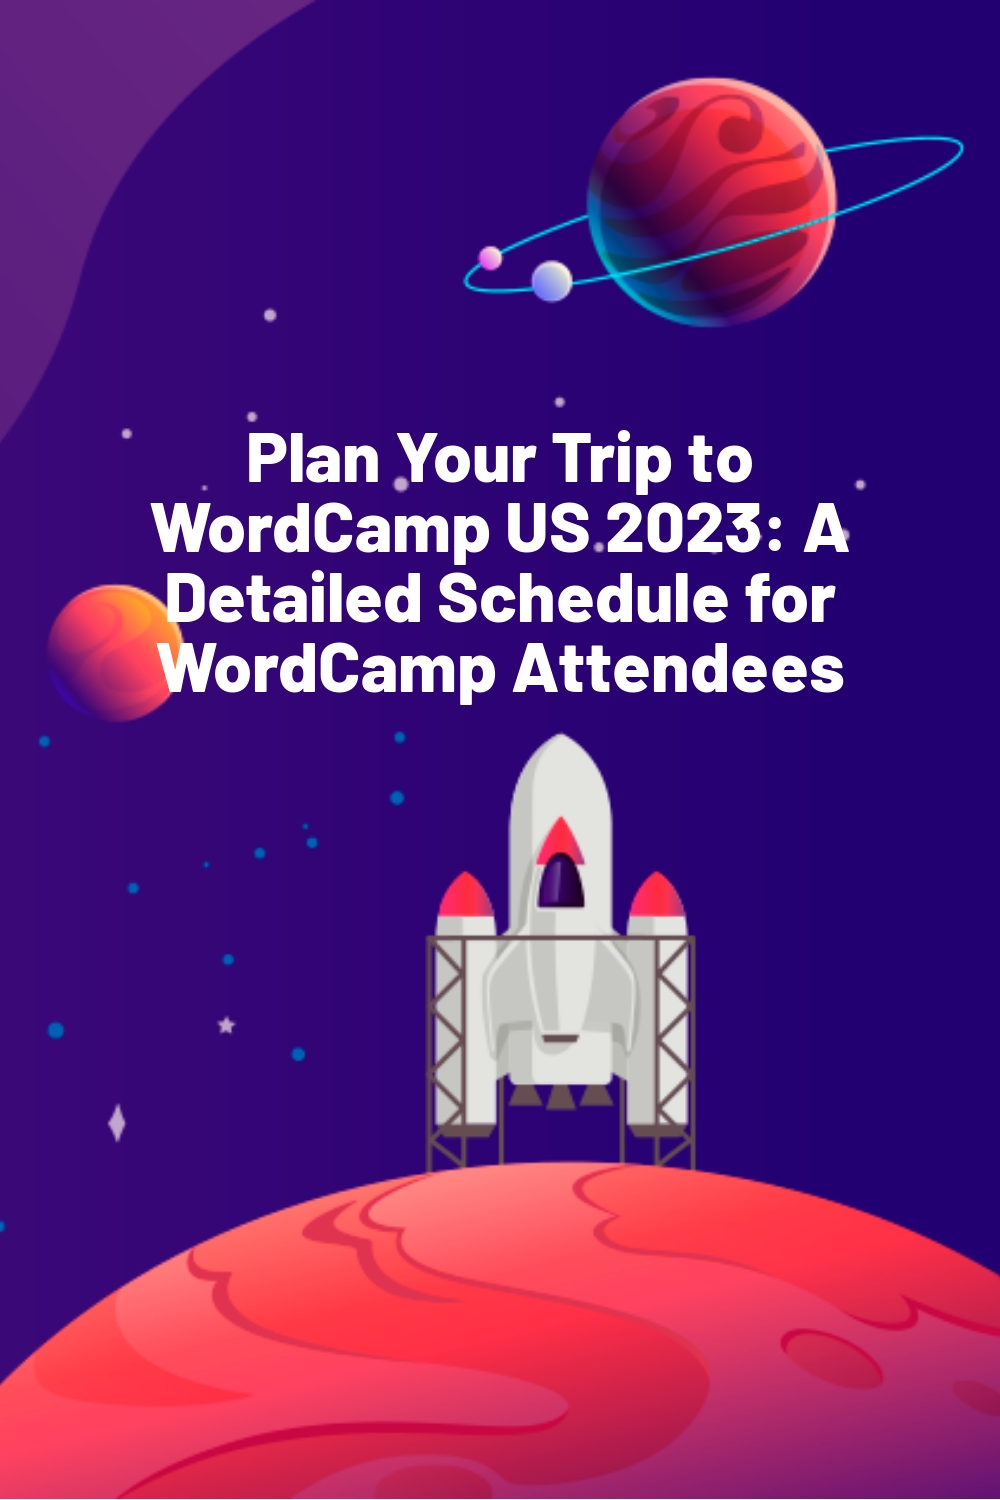 Plan Your Trip to WordCamp US 2023: A Detailed Schedule for WordCamp Attendees